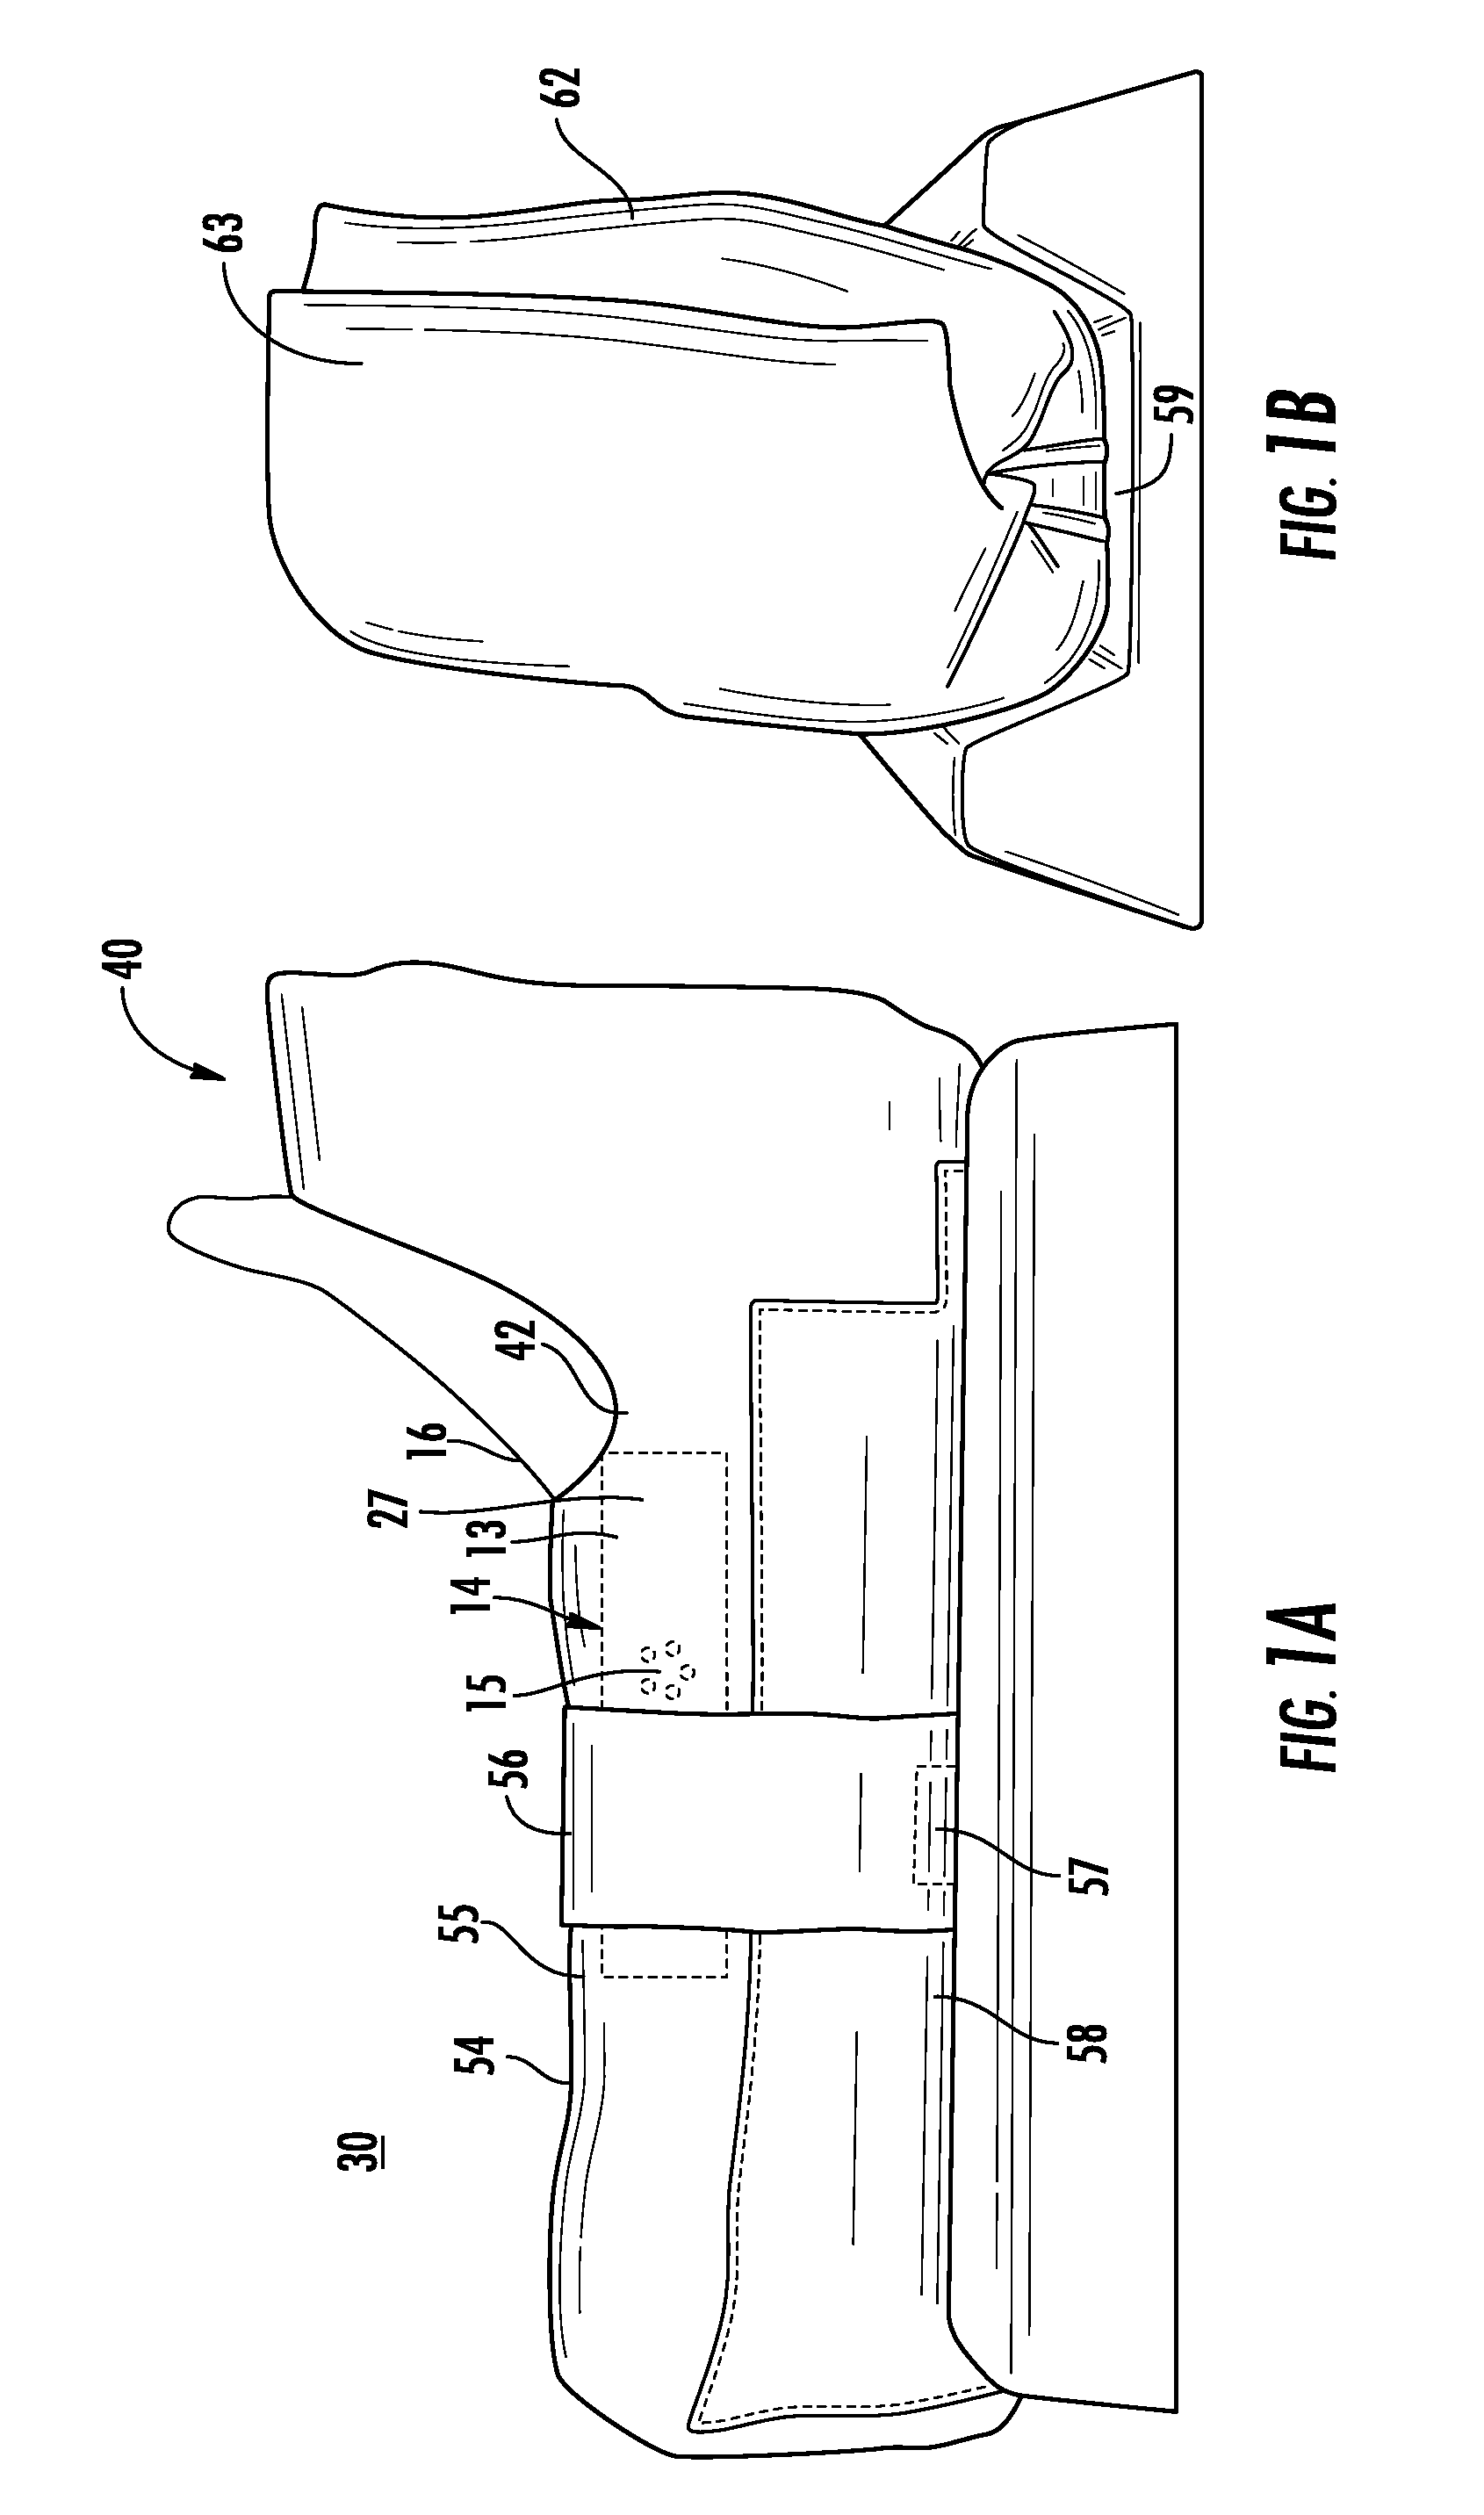 Compression device in combination with lower limb protection